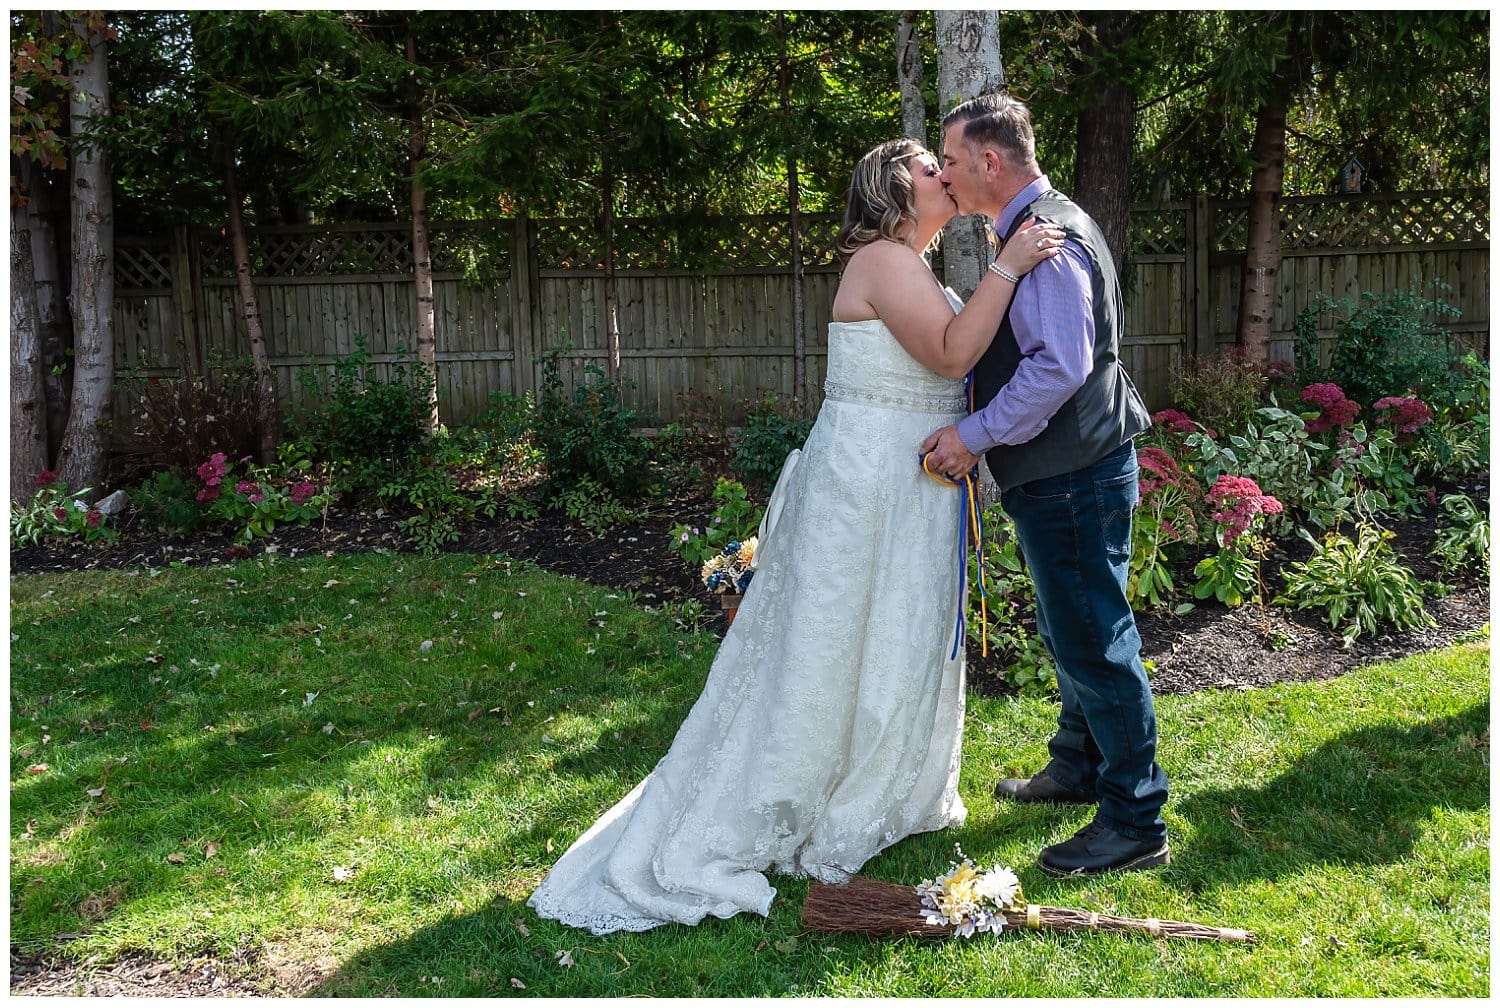 The bride and groom share their first kiss as Mr and Mrs Parsons during their backyard wedding.